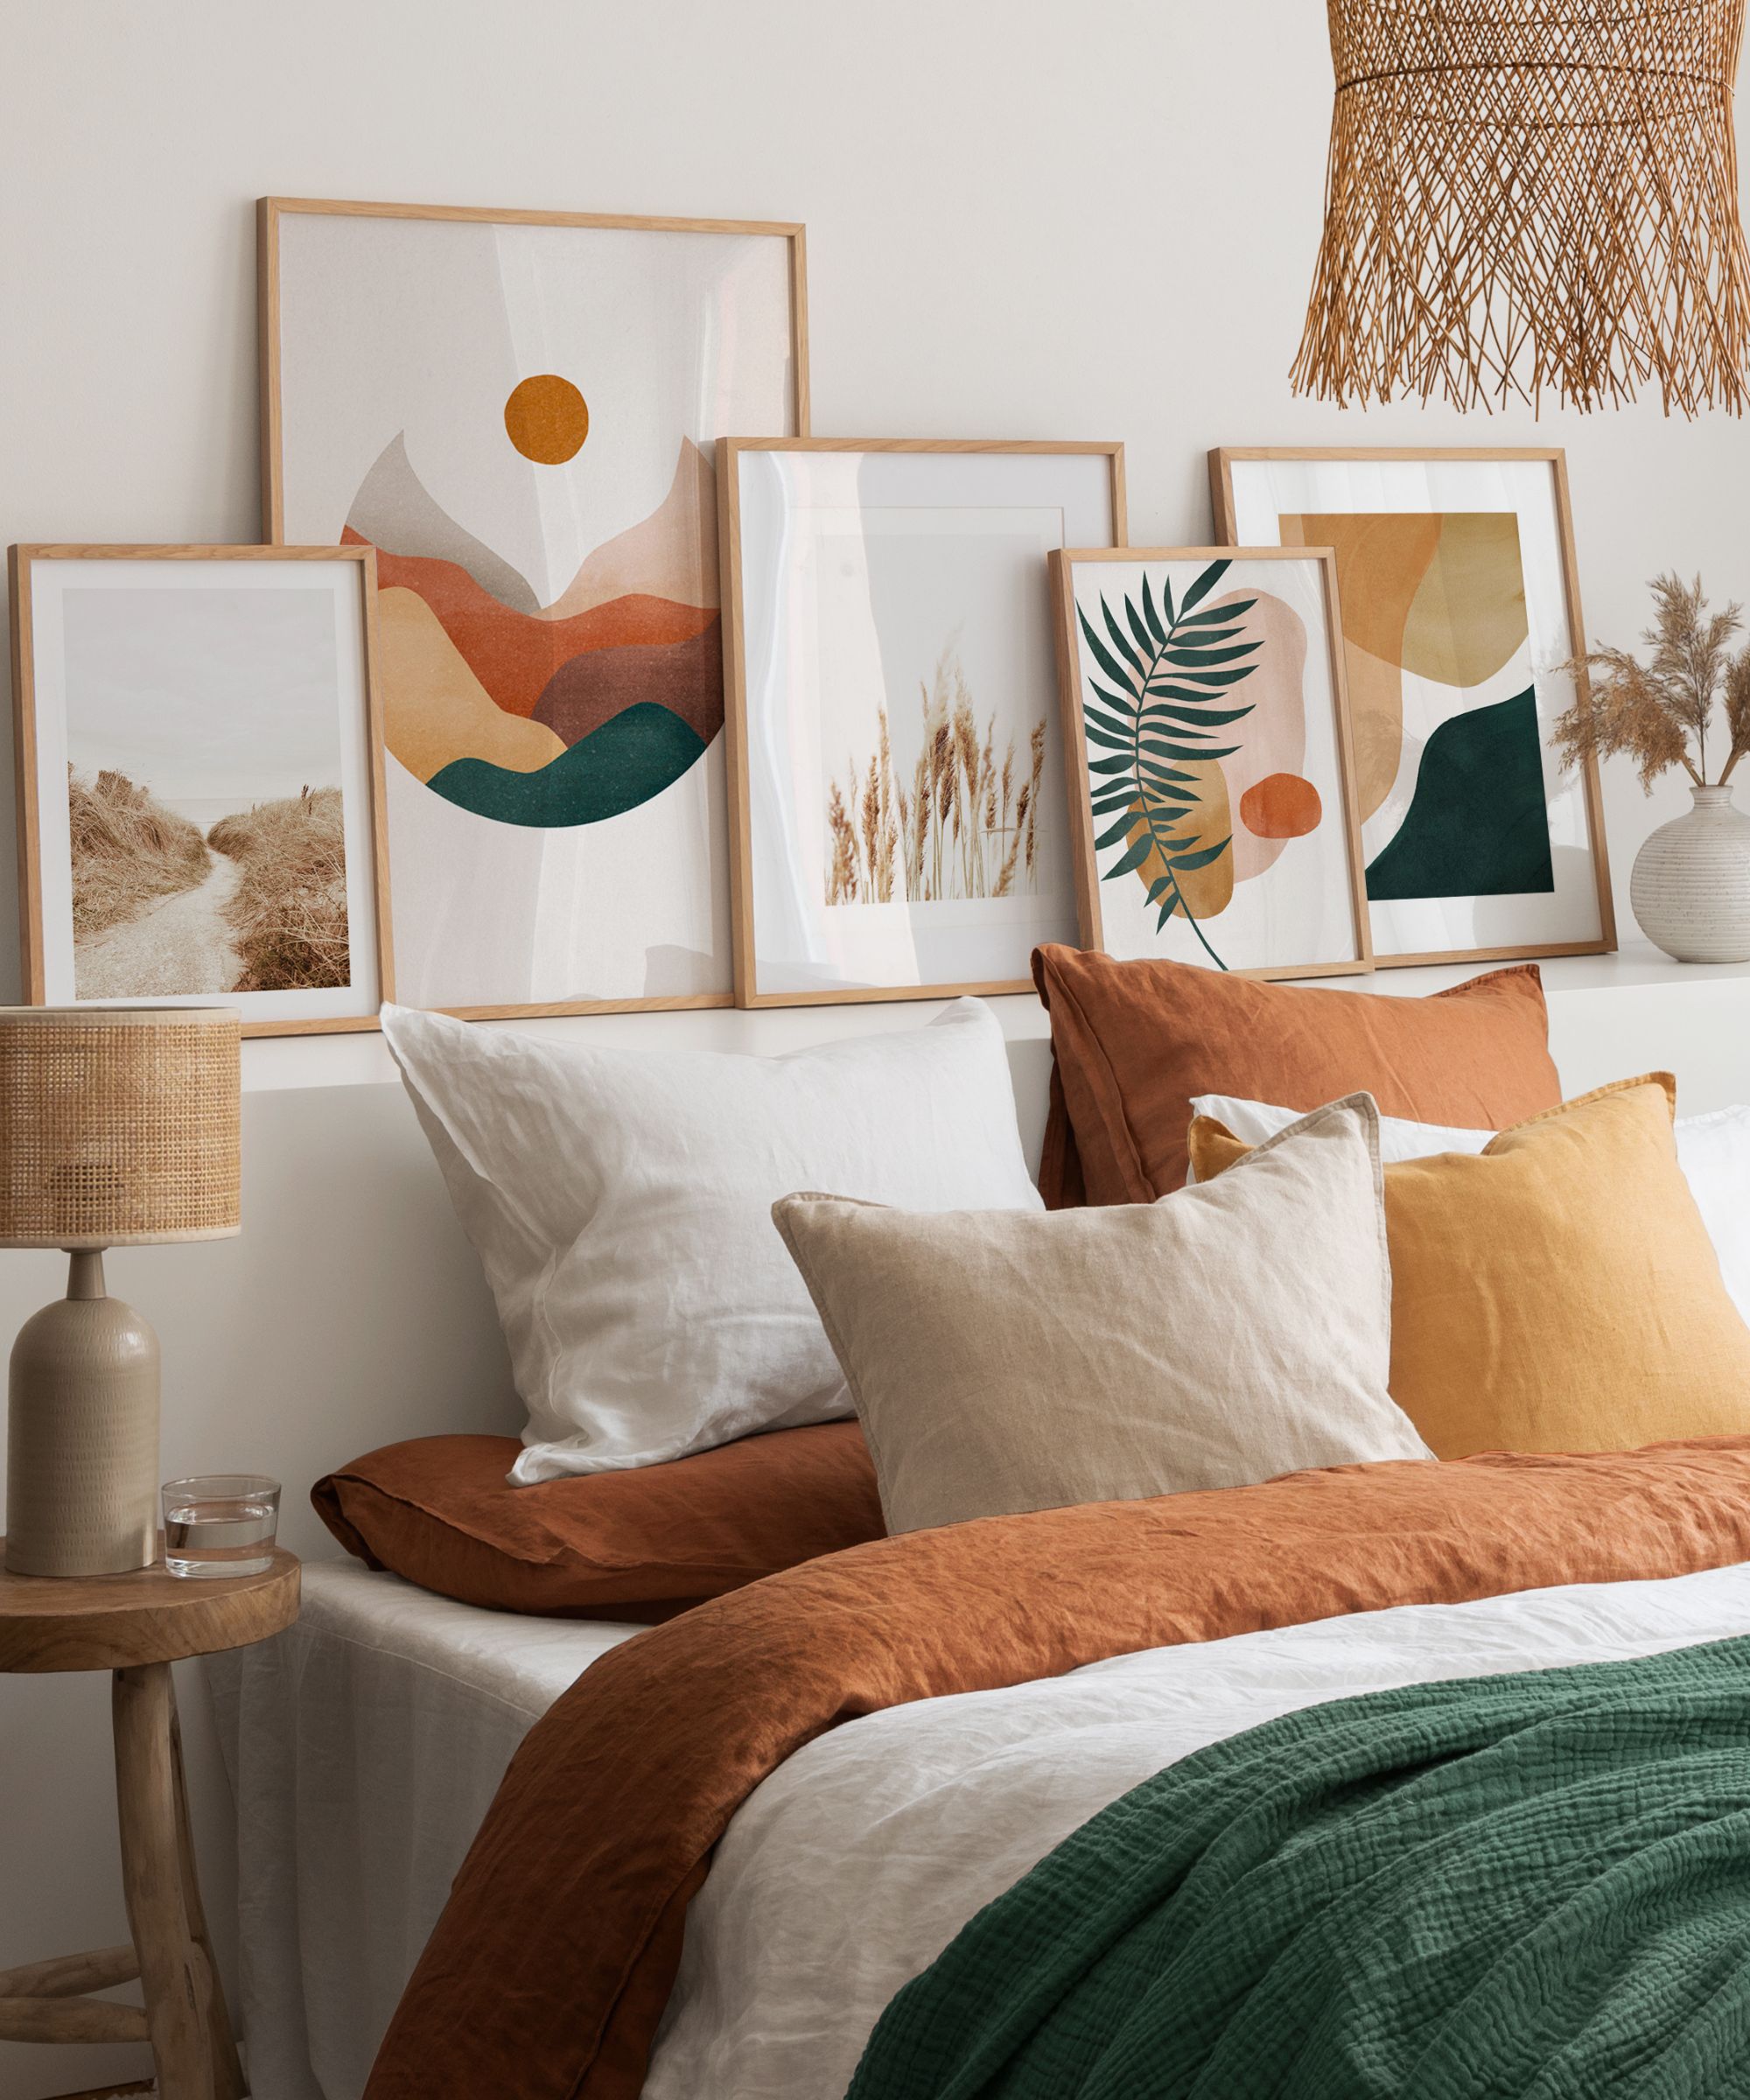 5 outdated bedroom trends design experts say are snooze-worthy in 2024